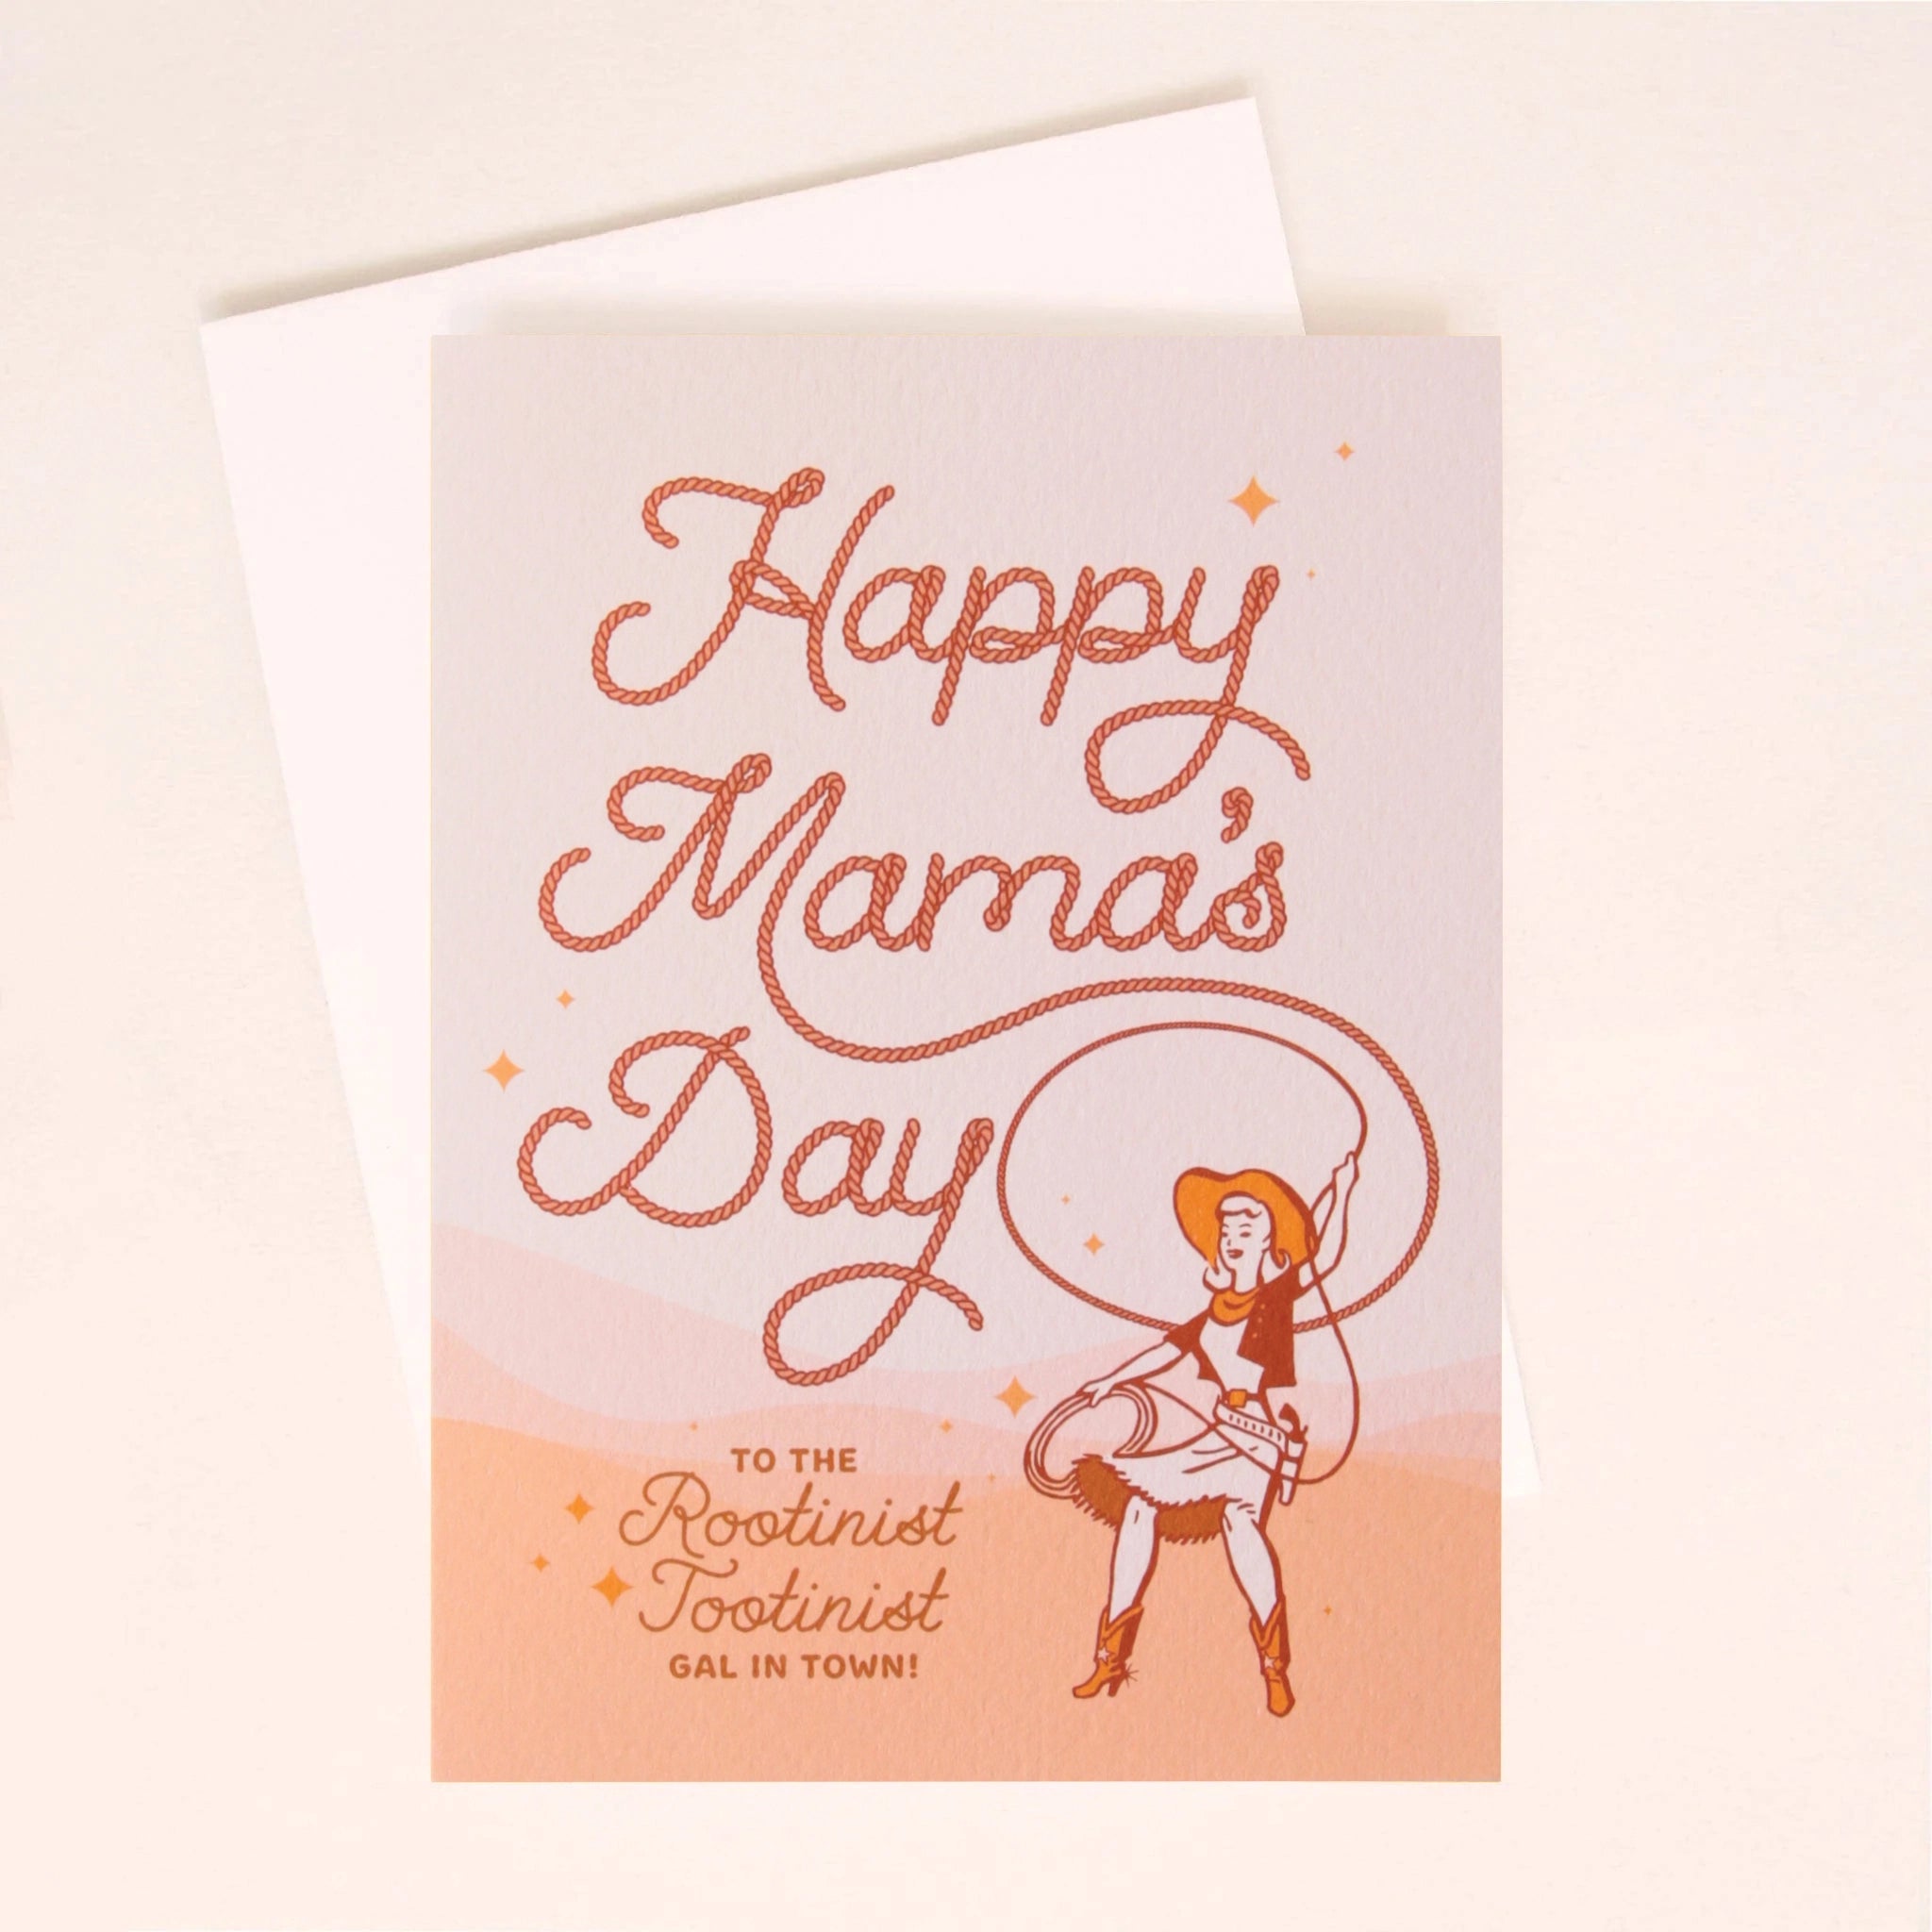 A light pink gradient card with text that reads, "Happy Mama's Day" in a rope font with an illustration of a cowgirl in the bottom right corner as well as more text that reads, "To The Rootinist Tootinist Gal In Town!" in brown cursive letters.